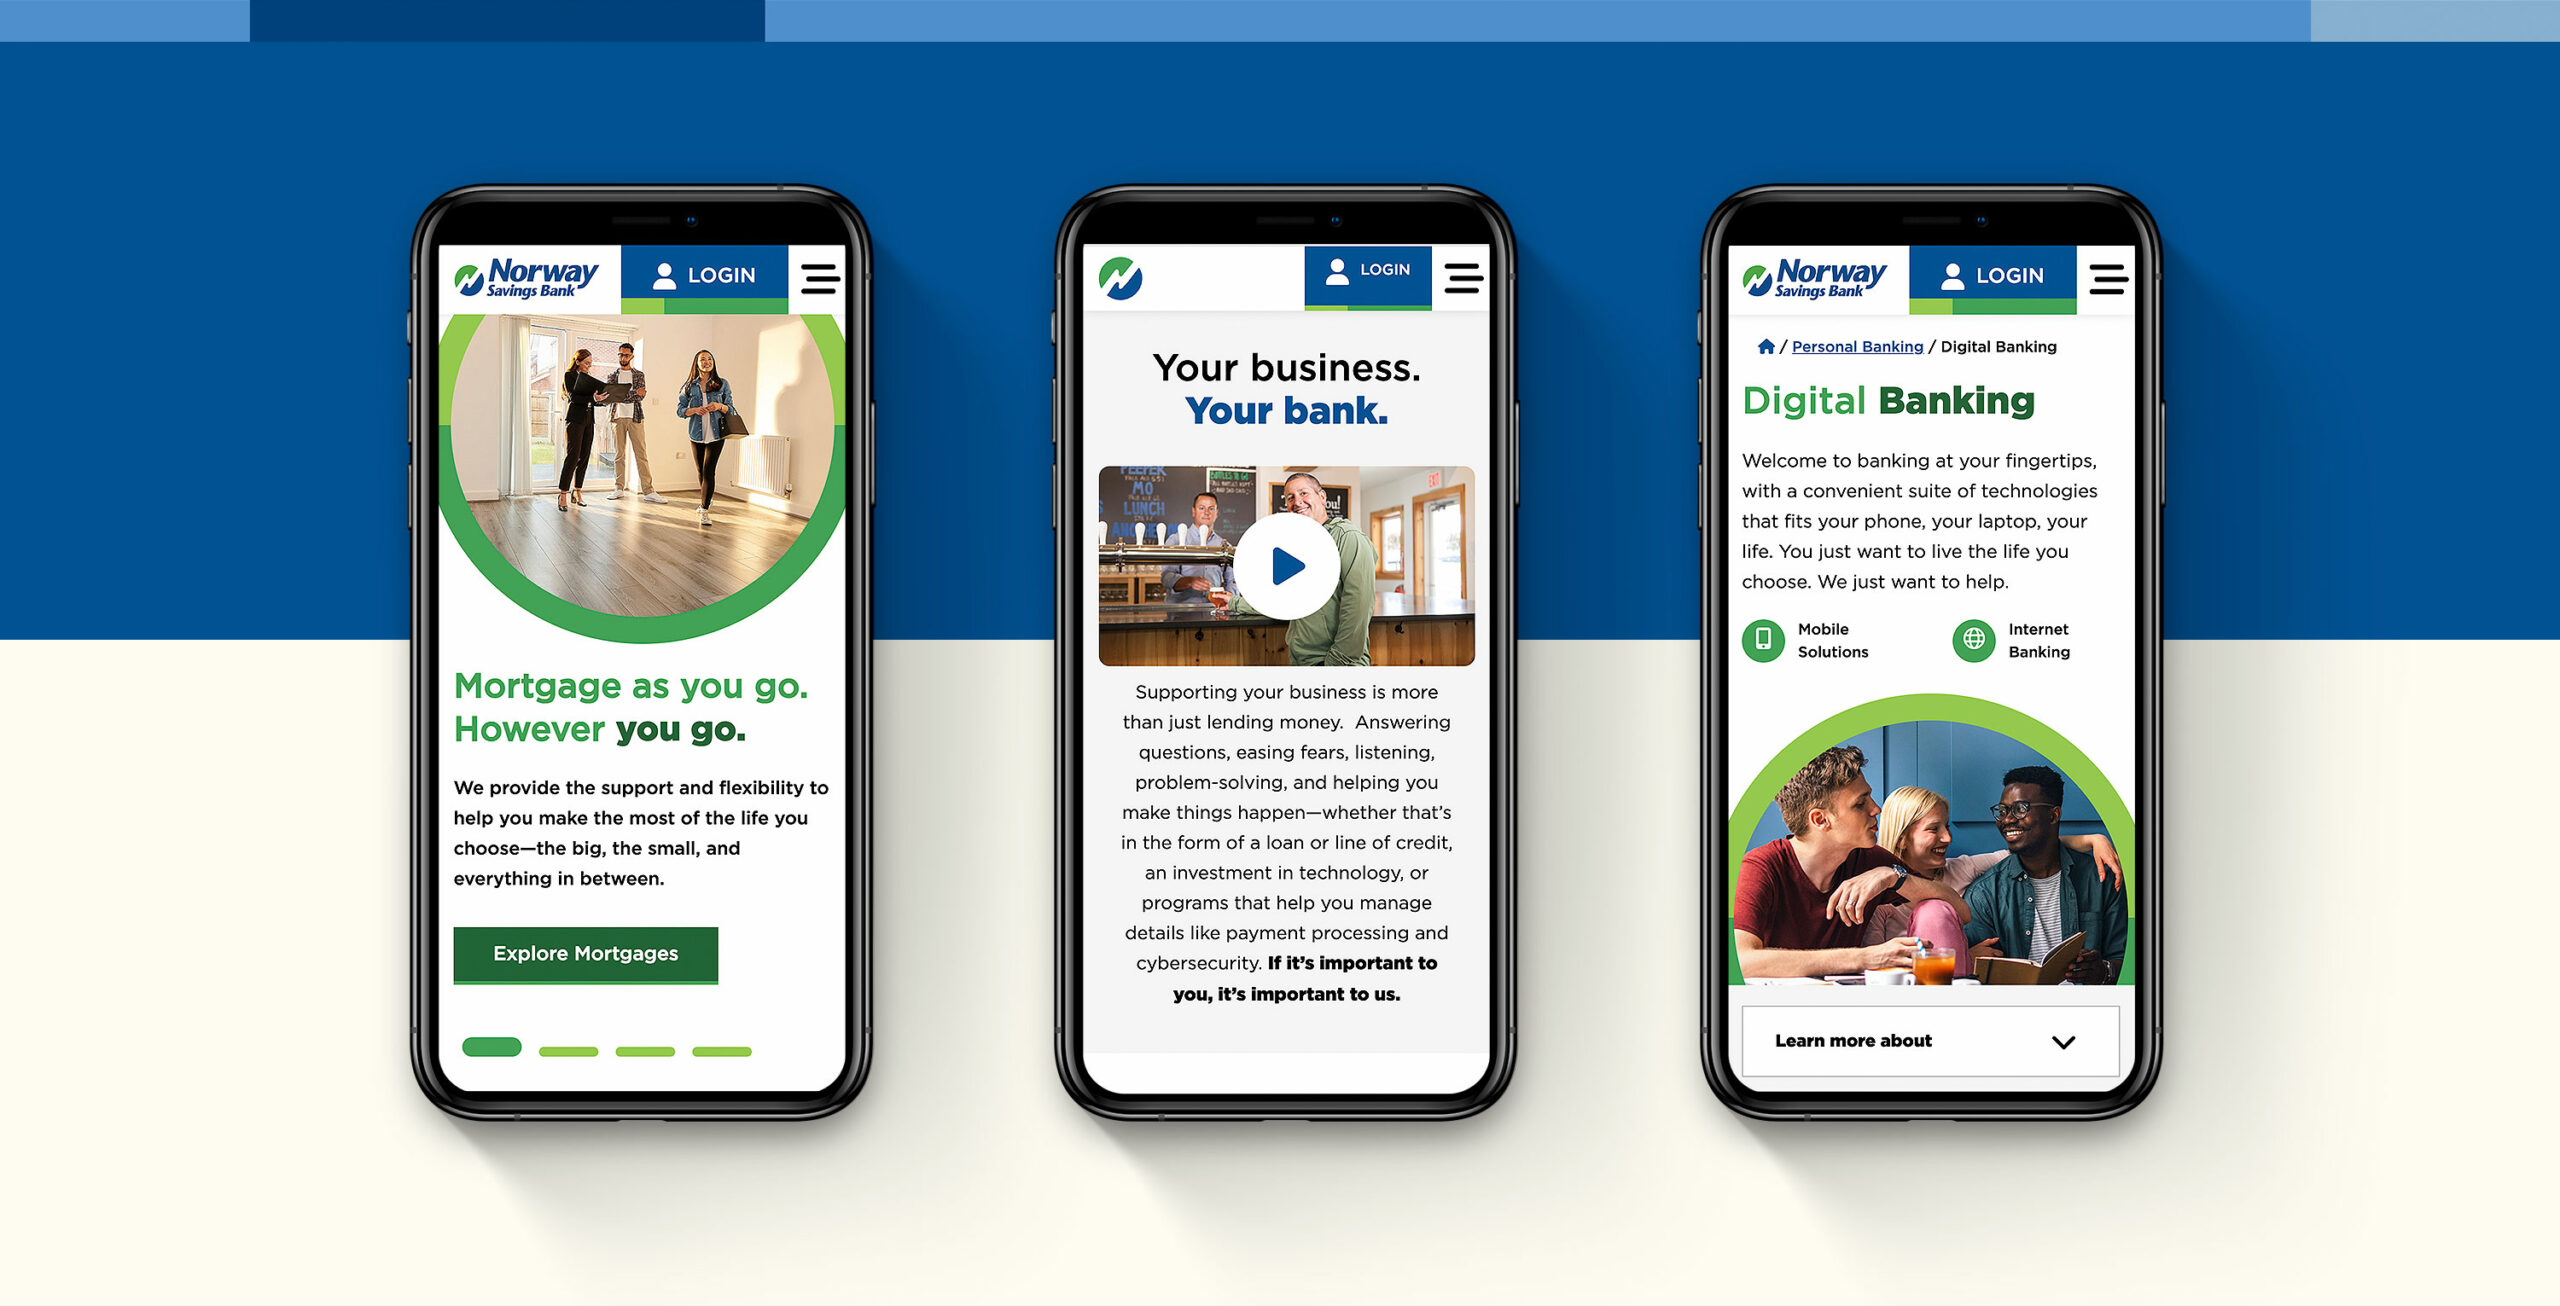 Norway Savings Bank Website on mobile devices